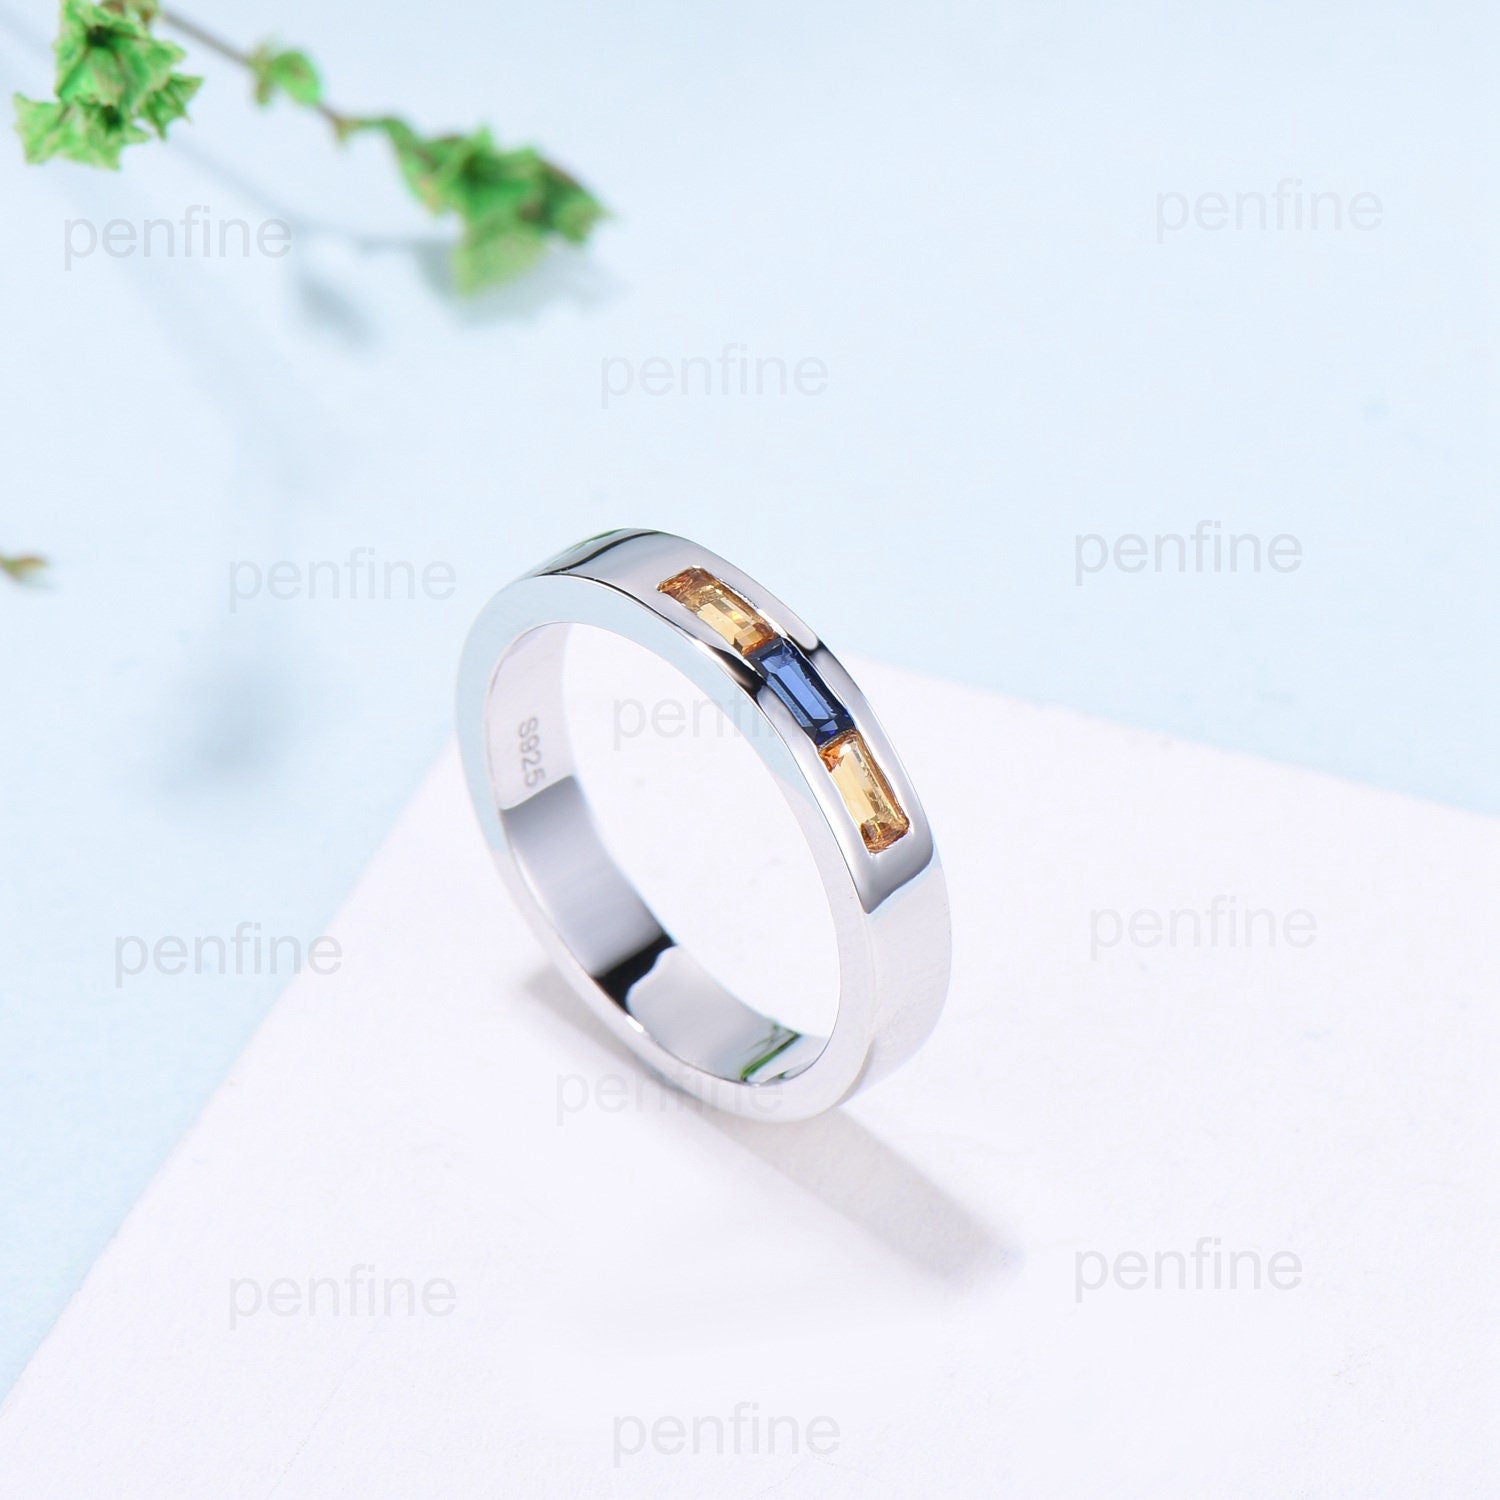 4mm Width Baguette Sapphire and Citrine Wedding Ring for Men Minimalist Brushed Wedding Band  Tension Design Retro Vintage Stacking Ring - PENFINE